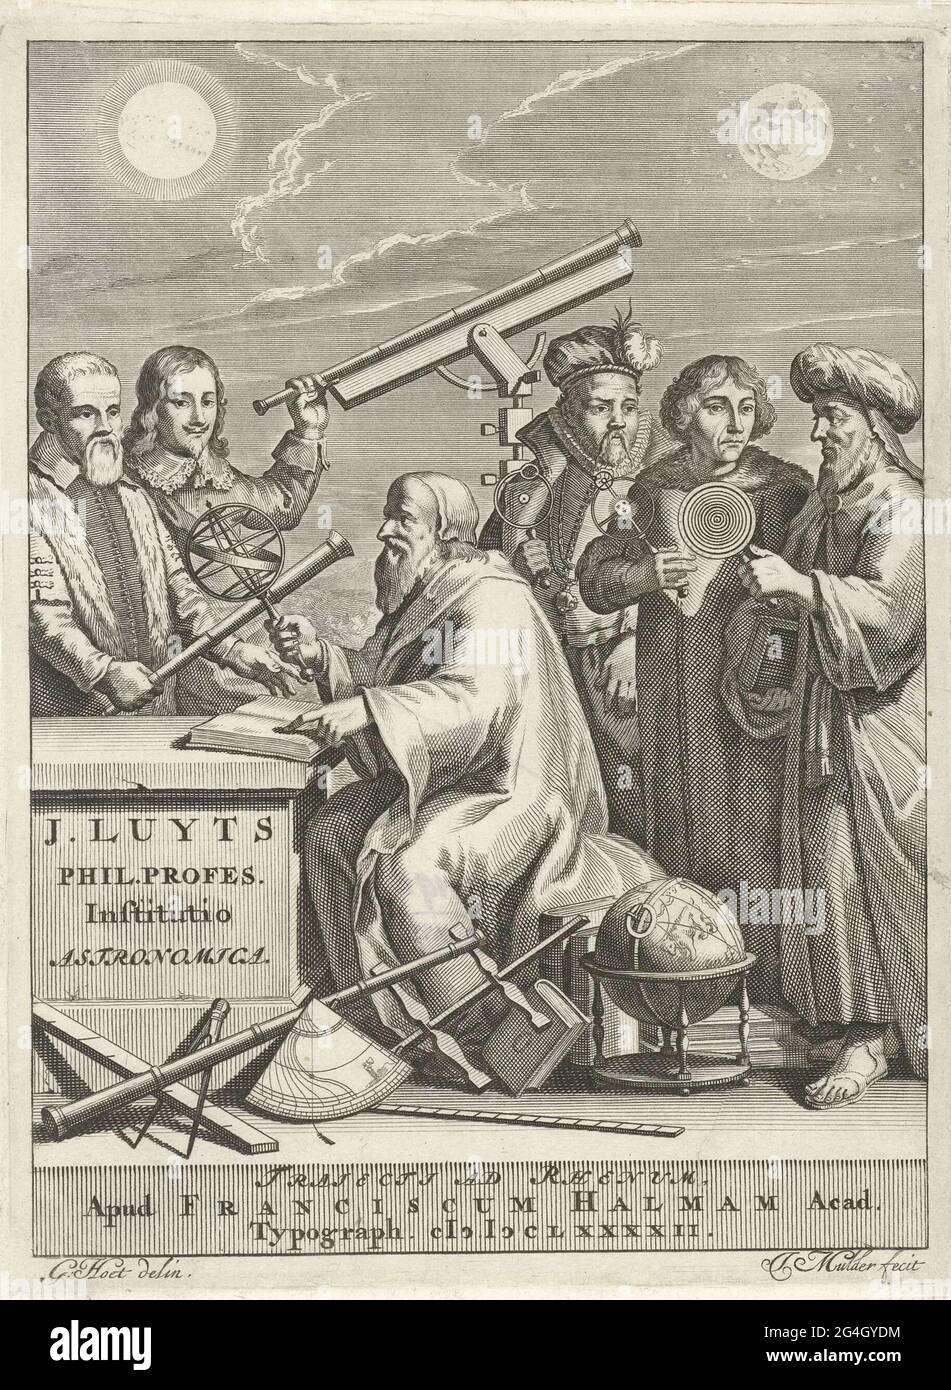 From left to right the astronomers are Galileo Galilei, Johannes